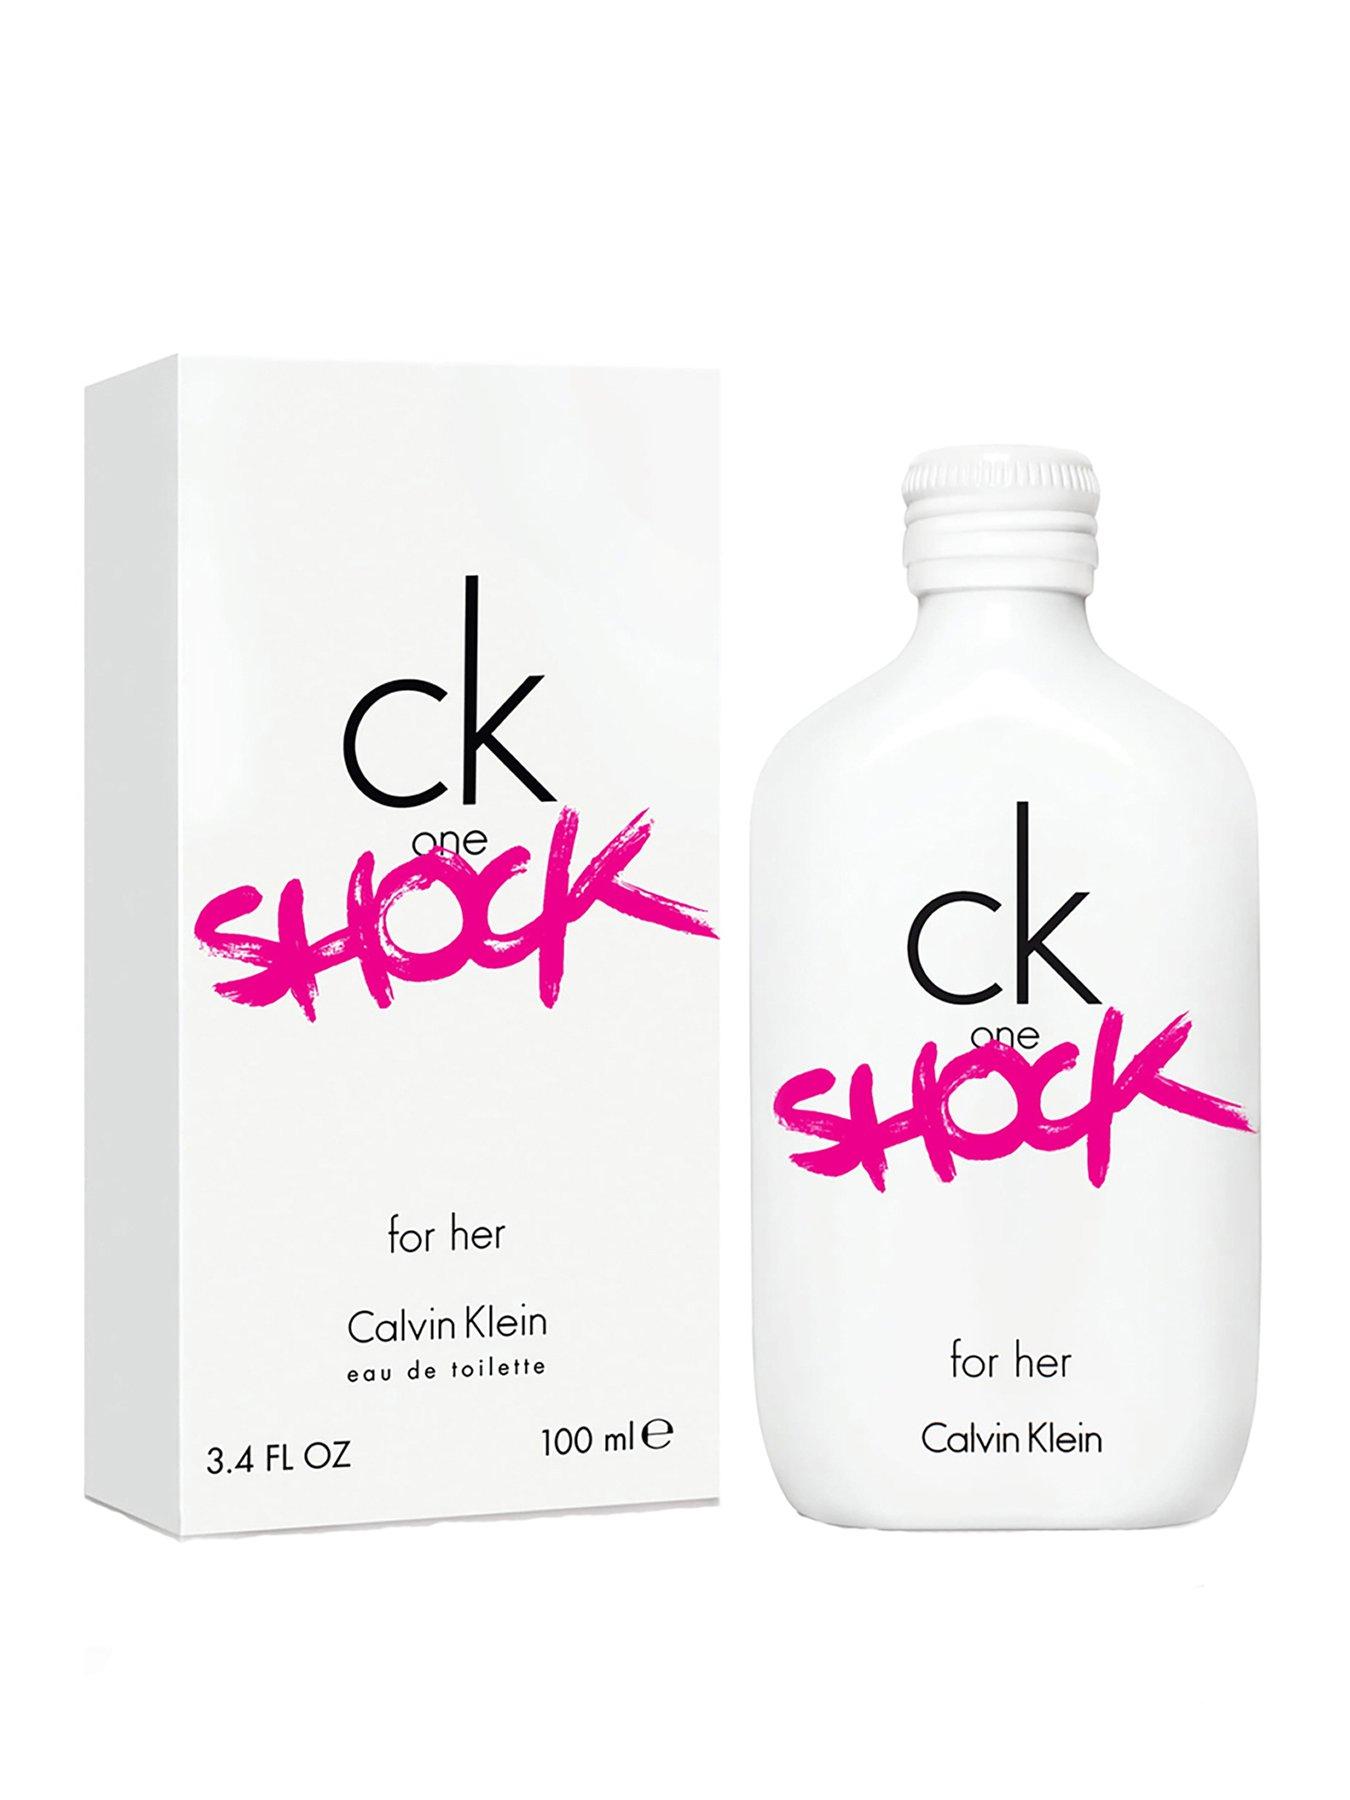 ck shock one for her